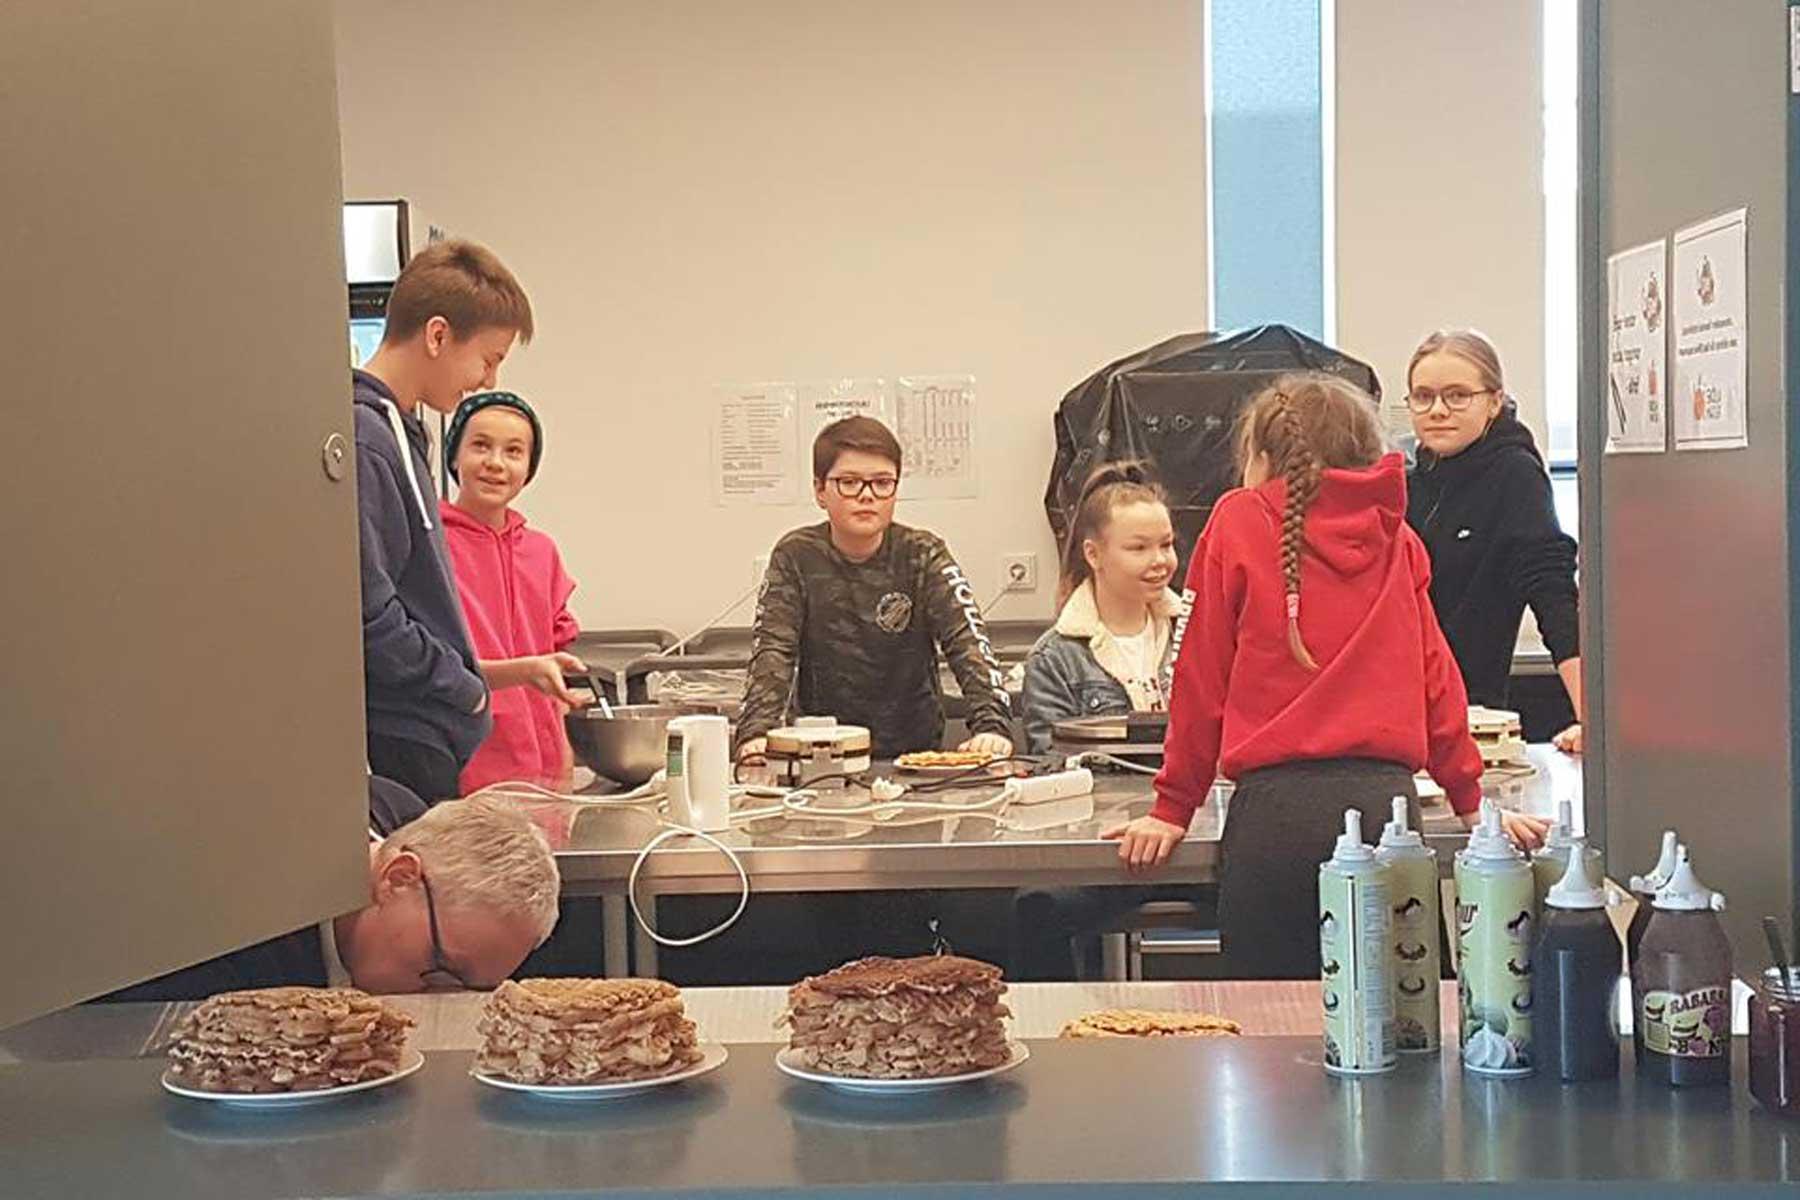 Selling waffles, a favorite dish, after worship was one way to raise to money for children in Uganda. Photo: Stefan Mar Gunnlaugsson / The Evangelical Church of Iceland